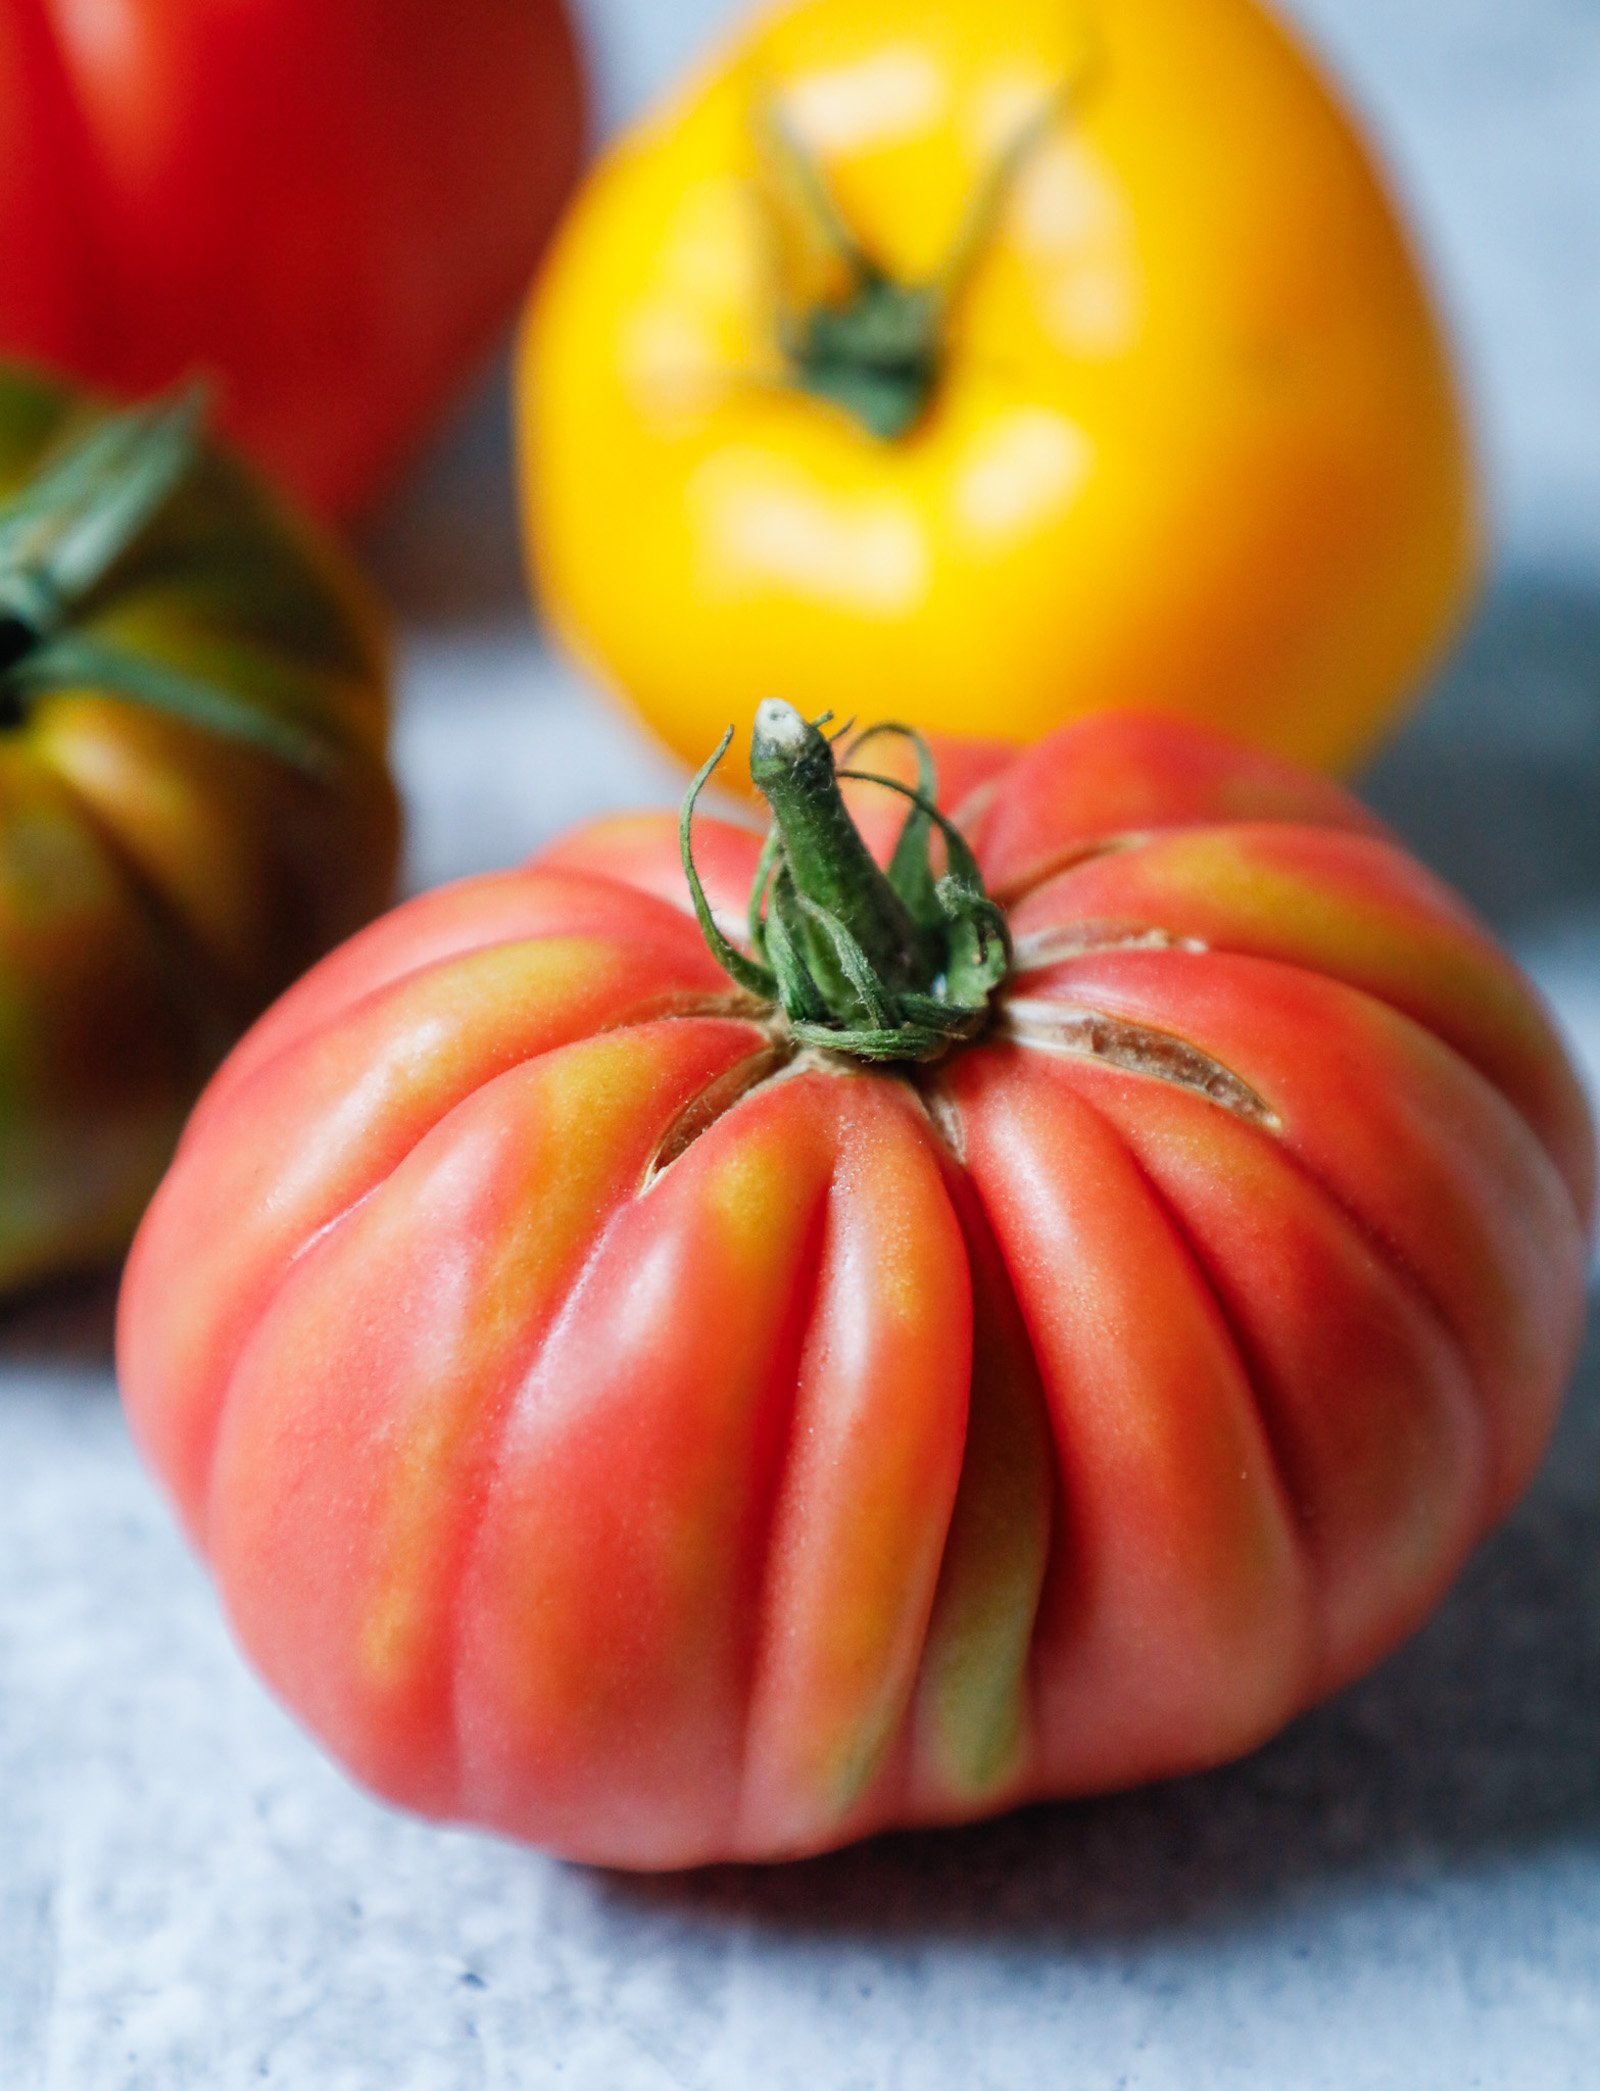 Heirloom tomatoes shown whole in multiple colors on a concrete background.